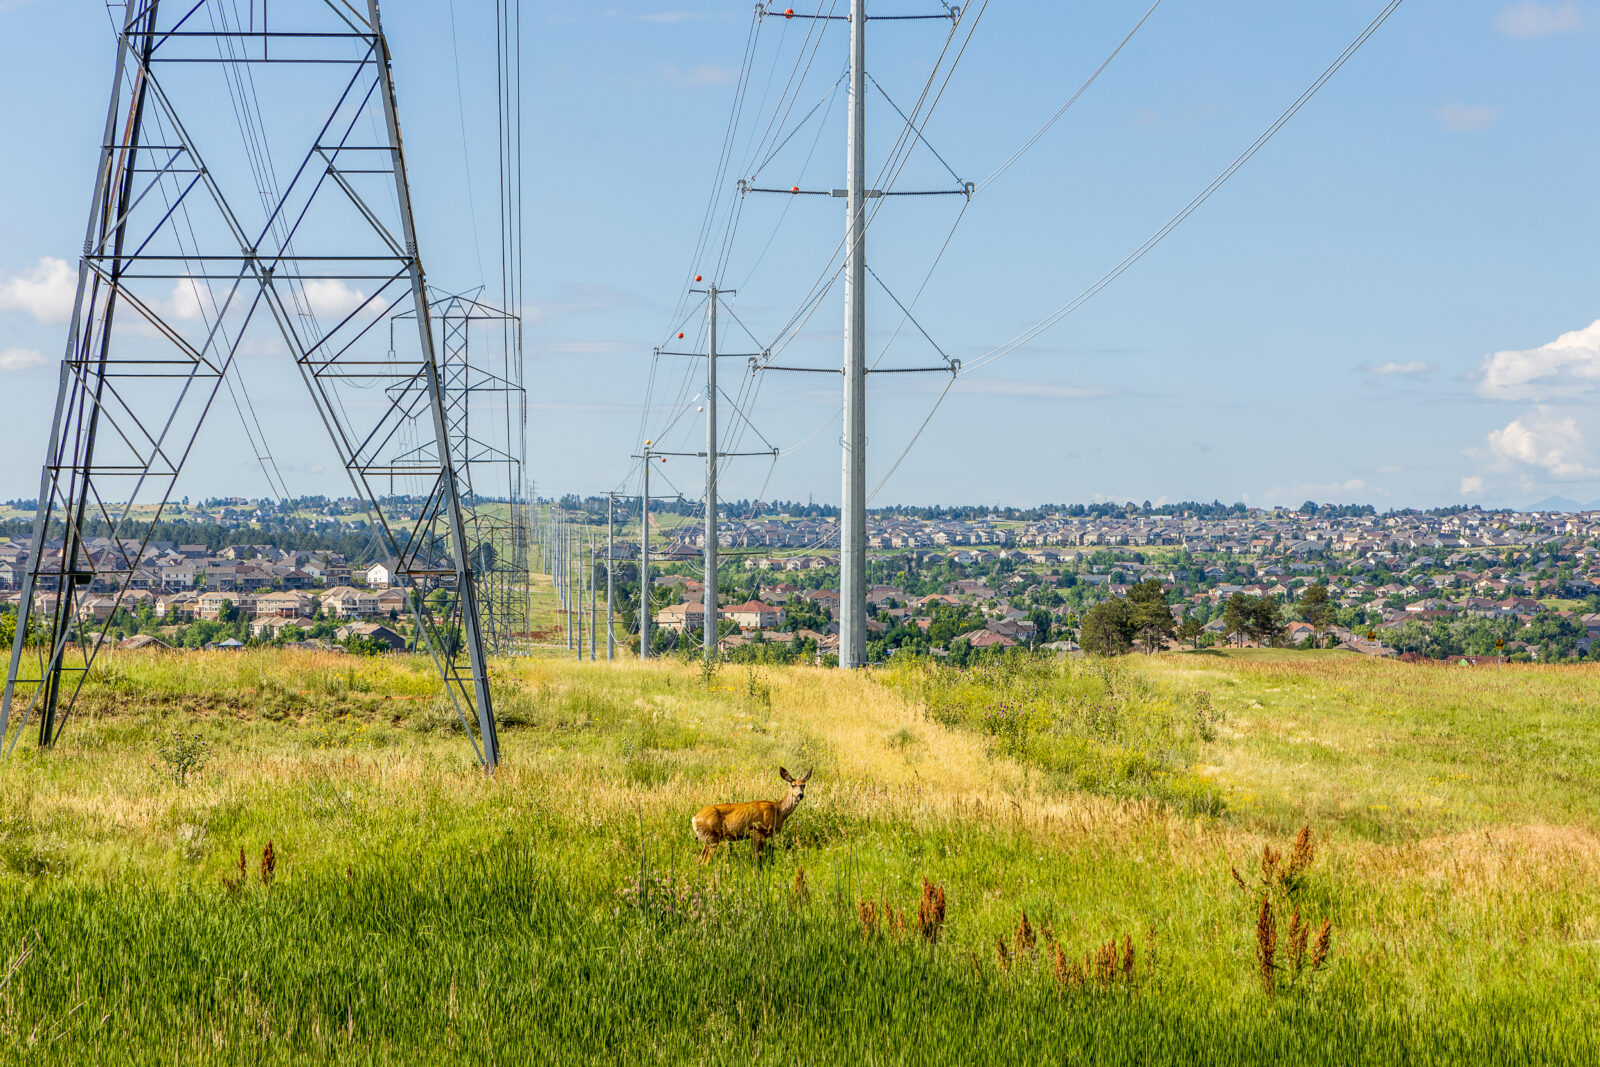 A wide view of transmission towers among a grassy field.